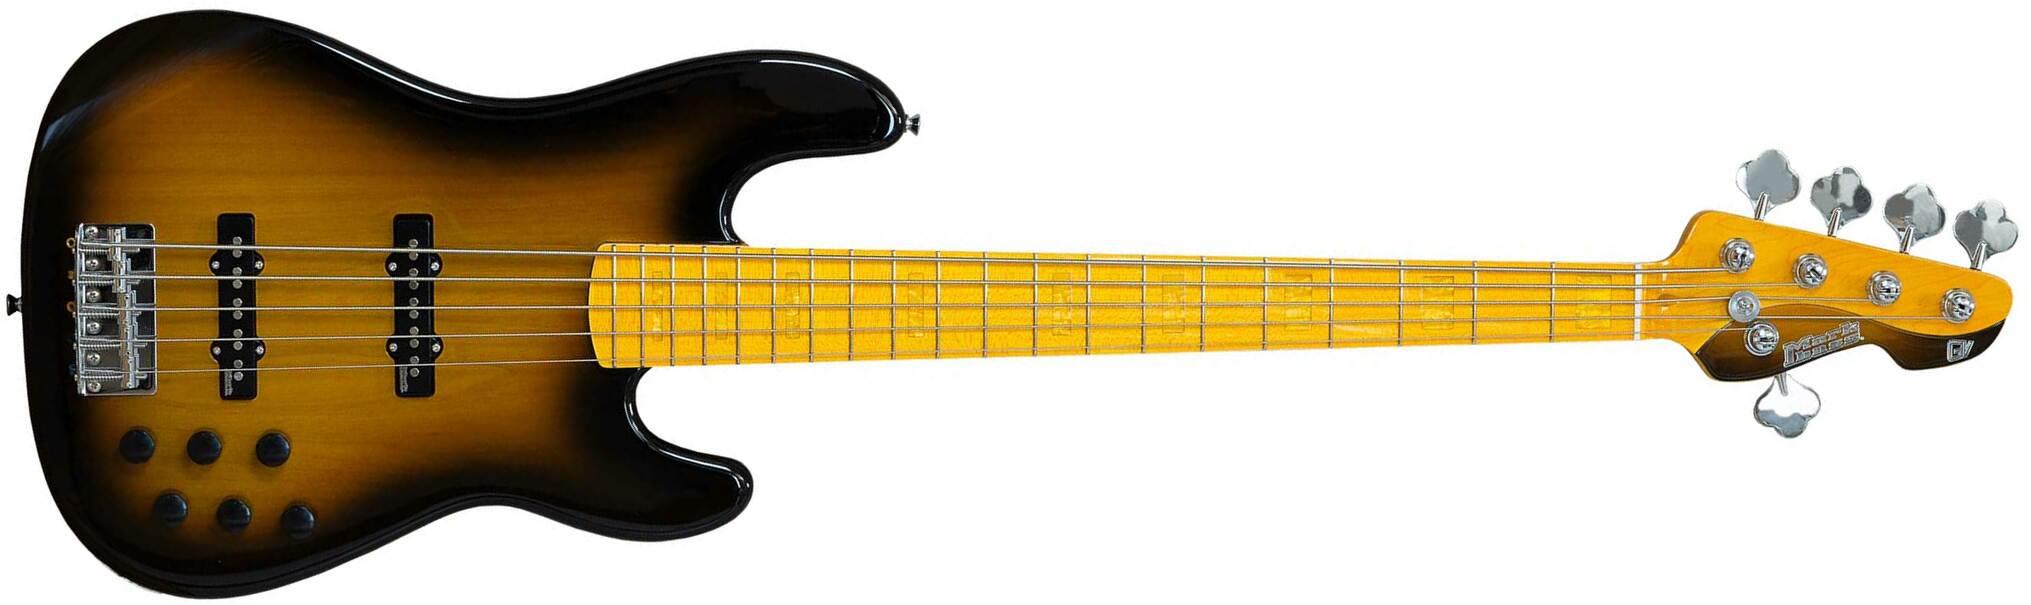 Markbass Mb Gv 5 Gloxy Val Cr Mp 5c Active Mn - Tobacco Sunburst - Basse Électrique Solid Body - Main picture